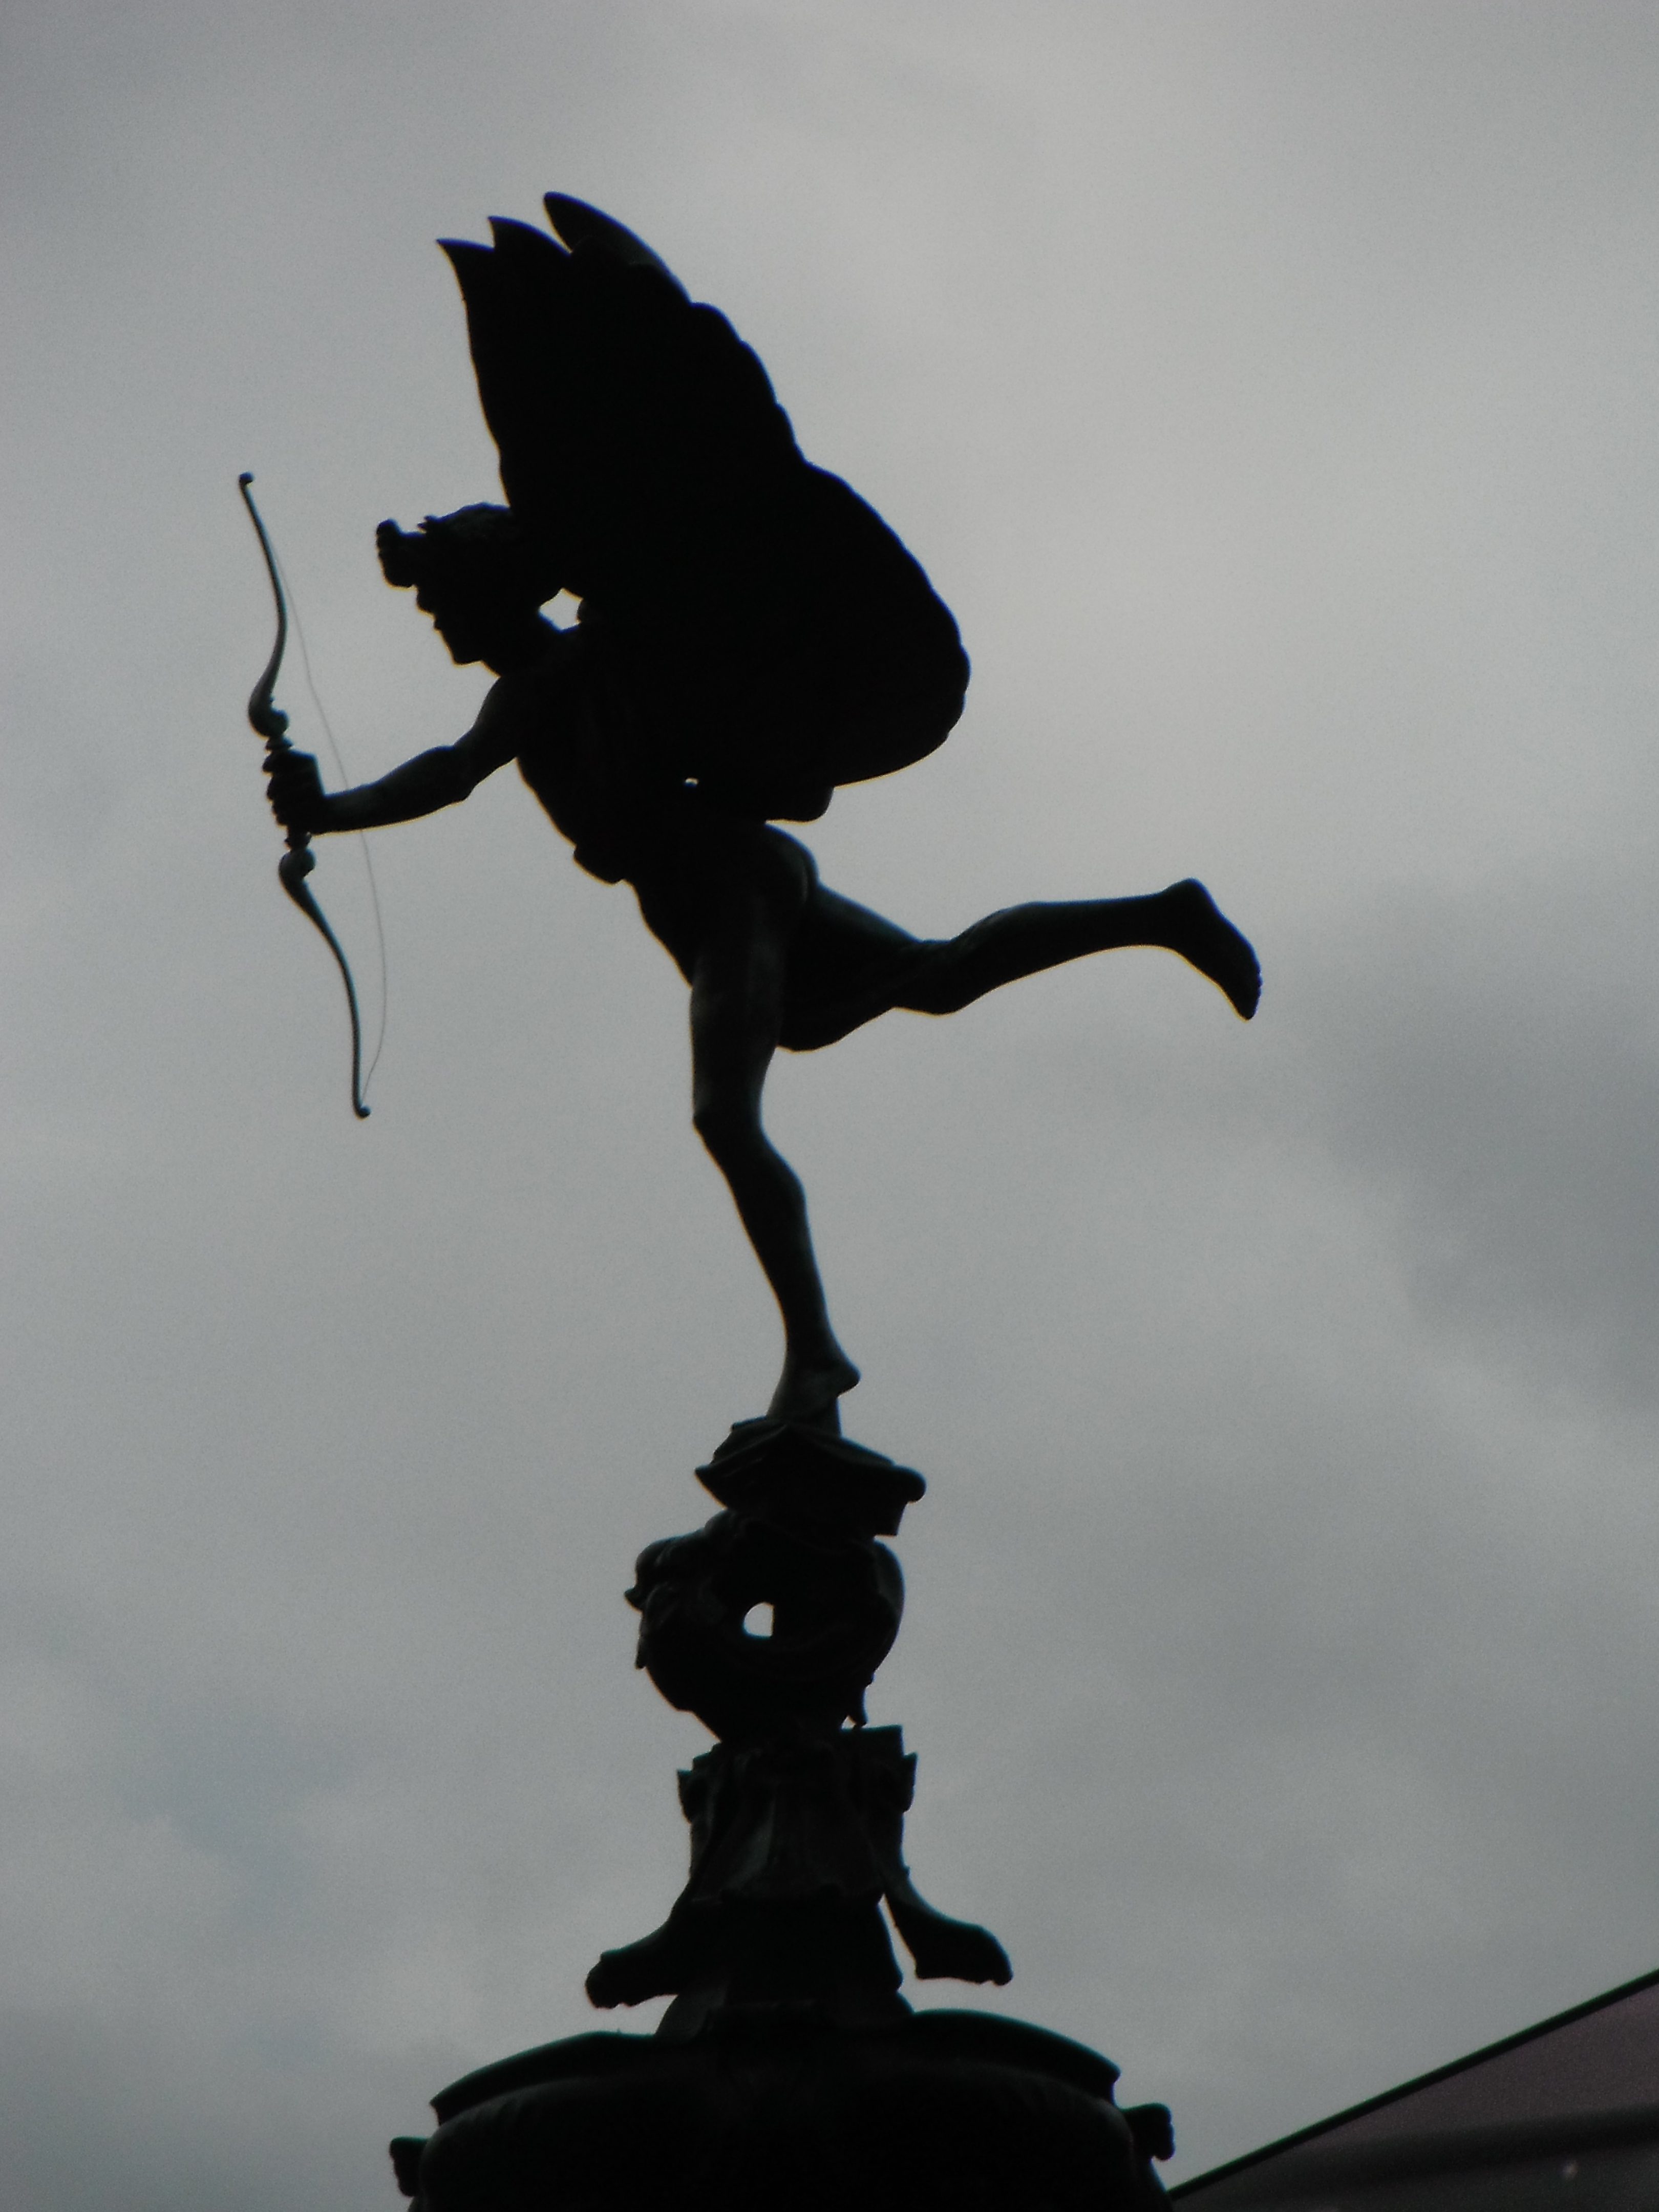 Photo taken by me - Eros statue, London Piccadilly Circus 